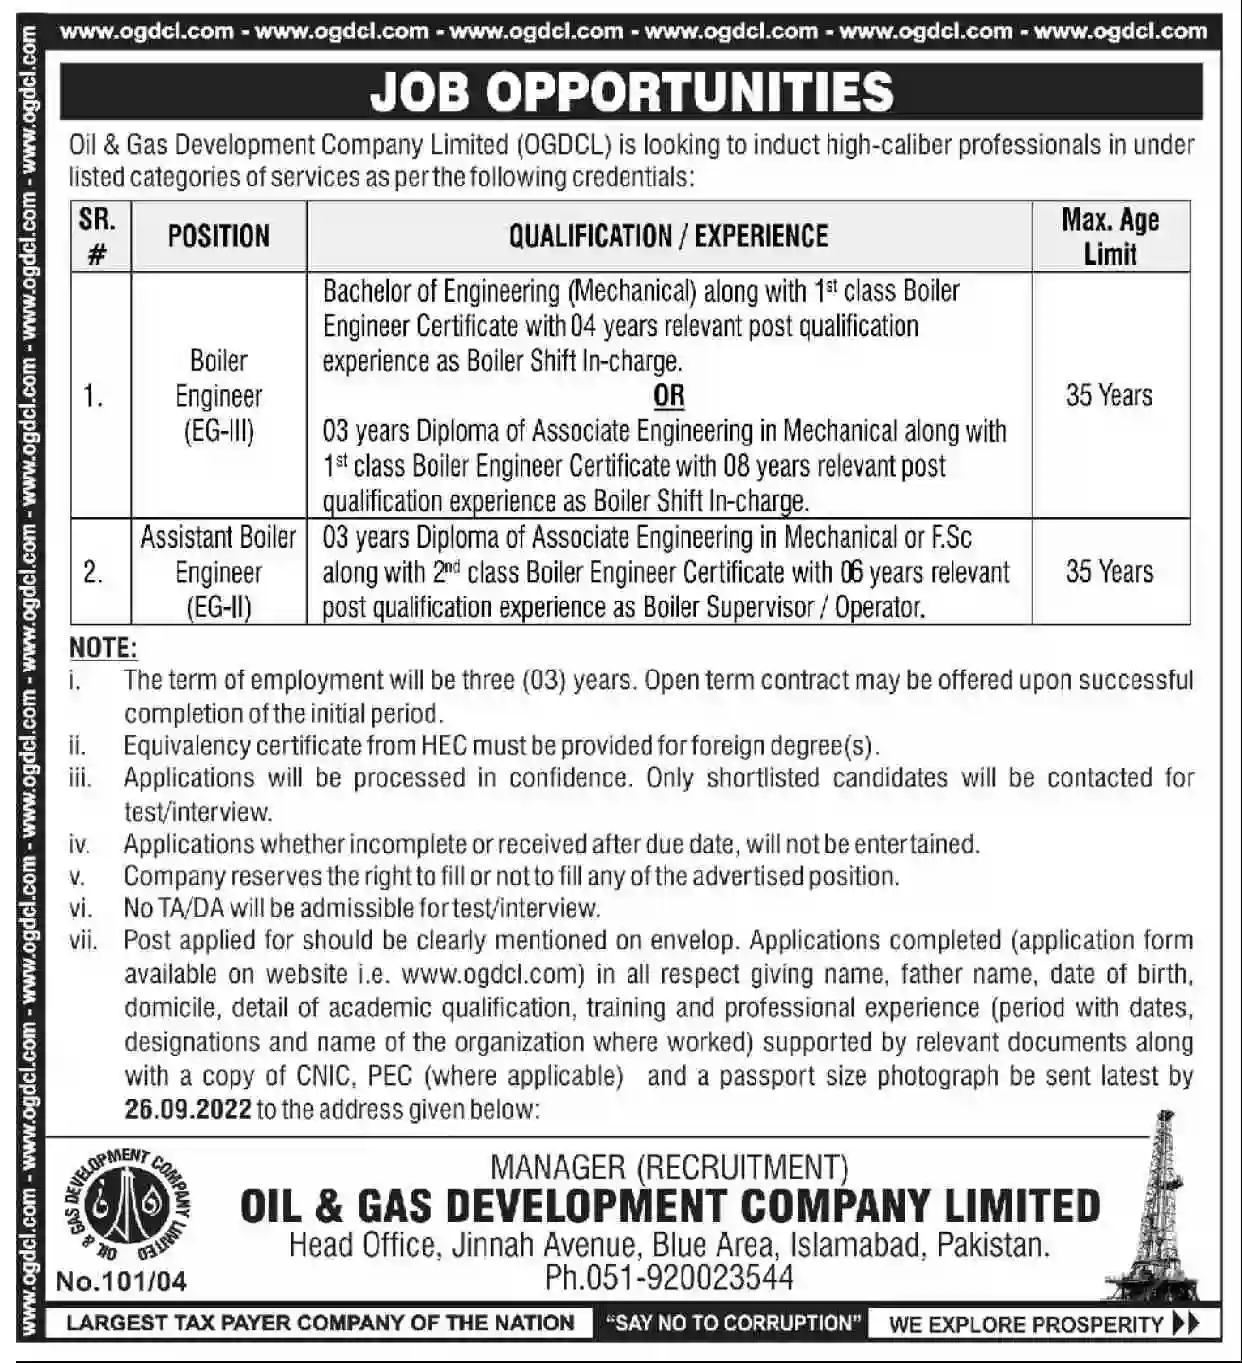 Oil & Gas Development Company Limited OGDCL Jobs 2022 www.ogdcl.com